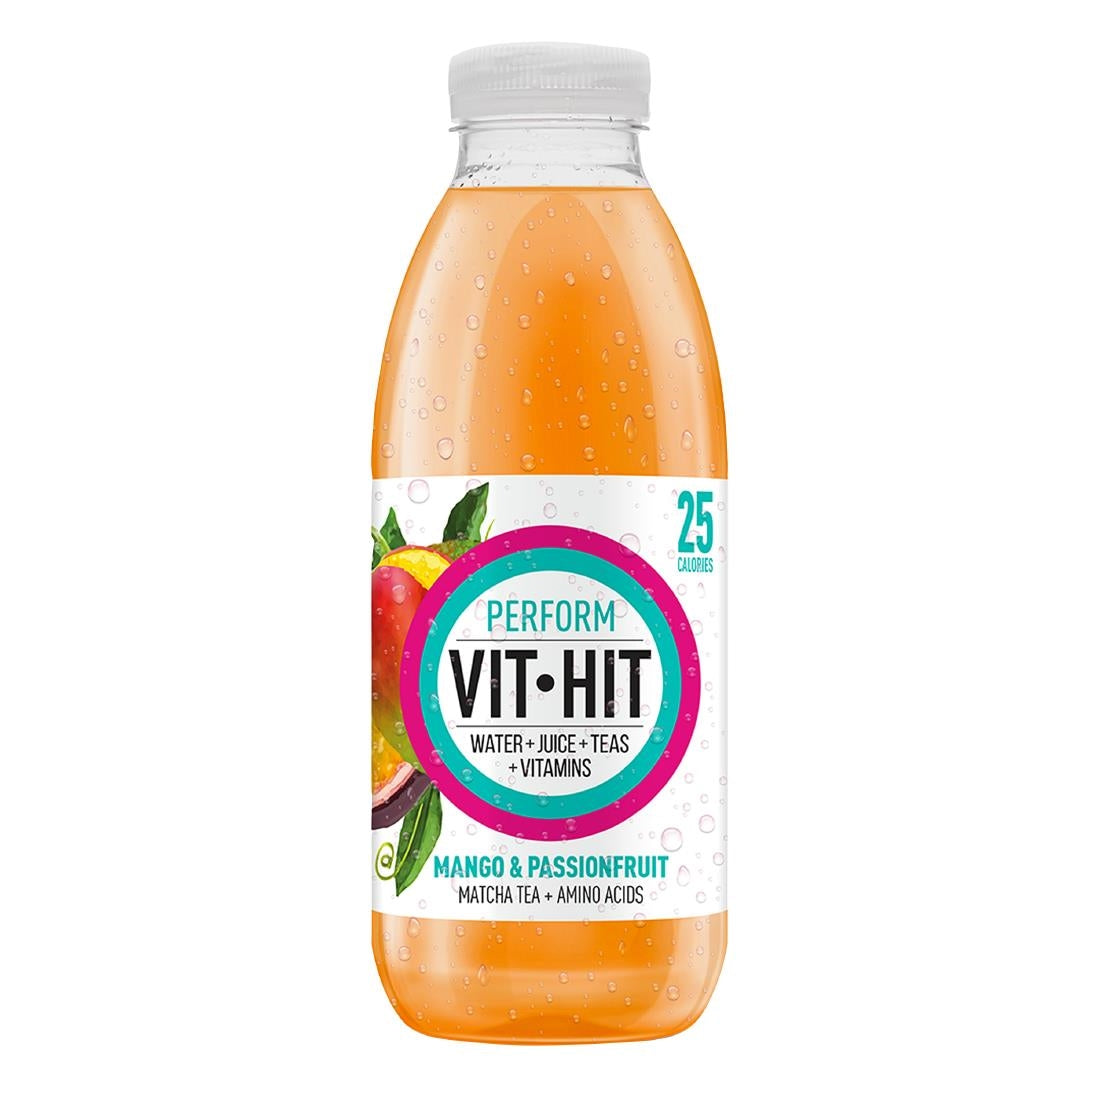 HS823 VITHIT Perform Mango & Passionfruit Vitamin Water 500ml (Pack of 12)